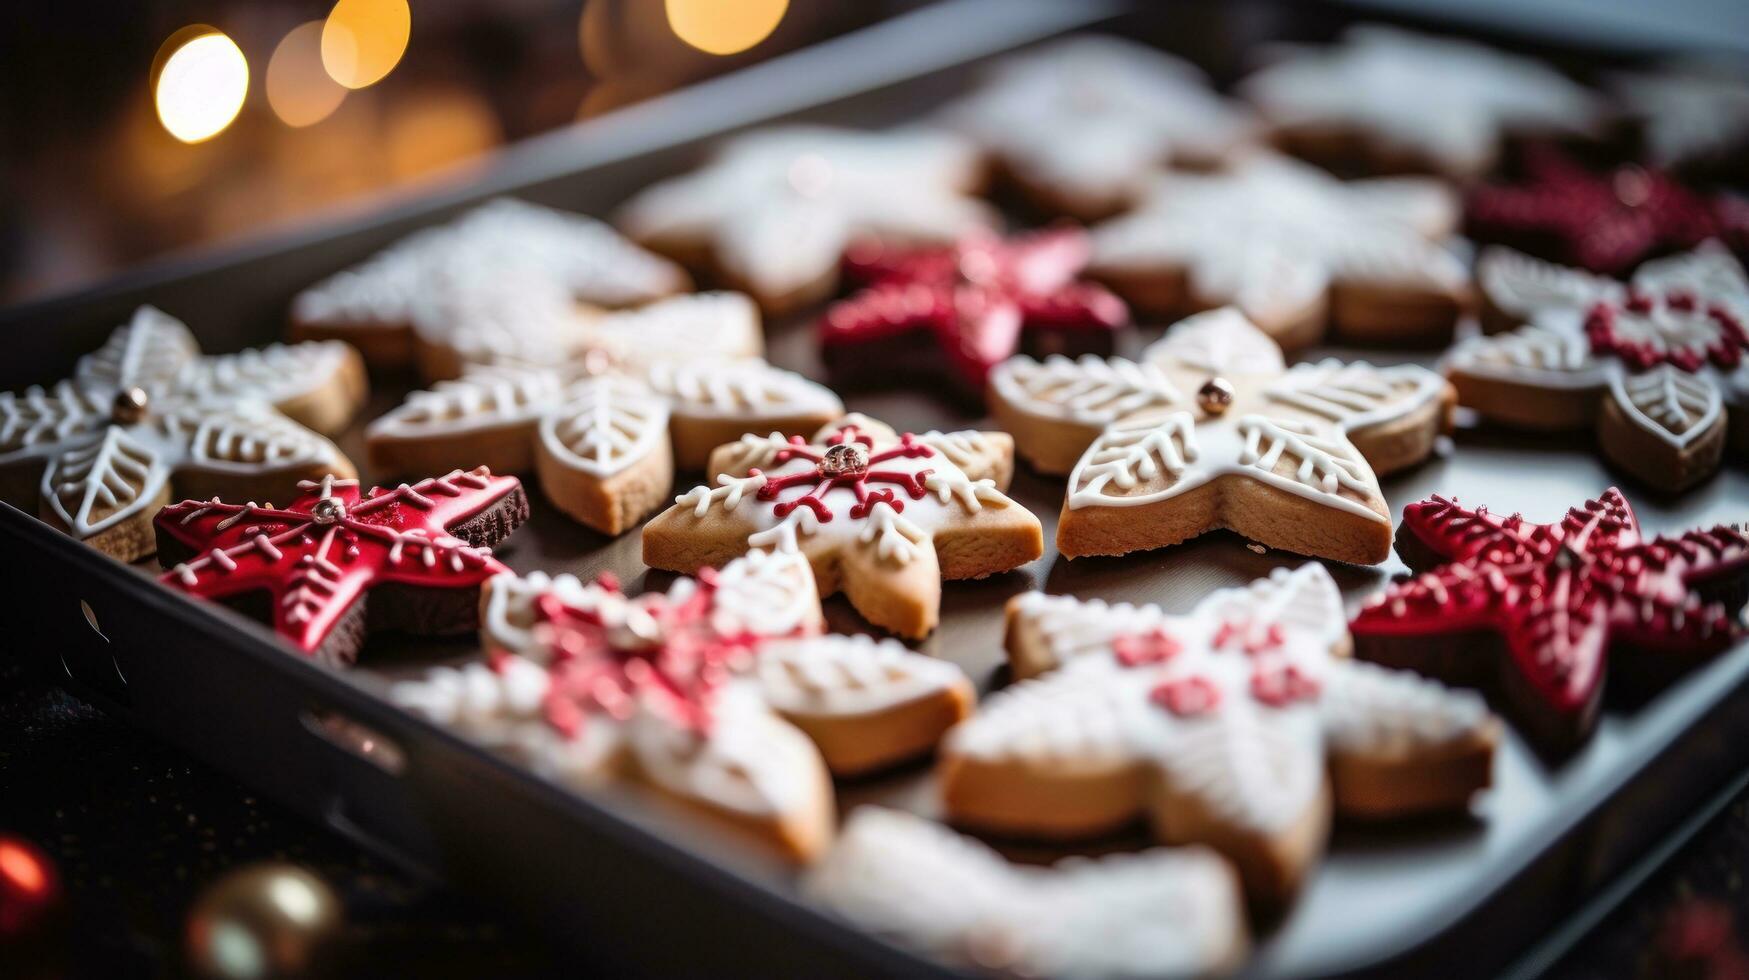 Close-up of a tray of beautifully decorated Christmas cookies photo